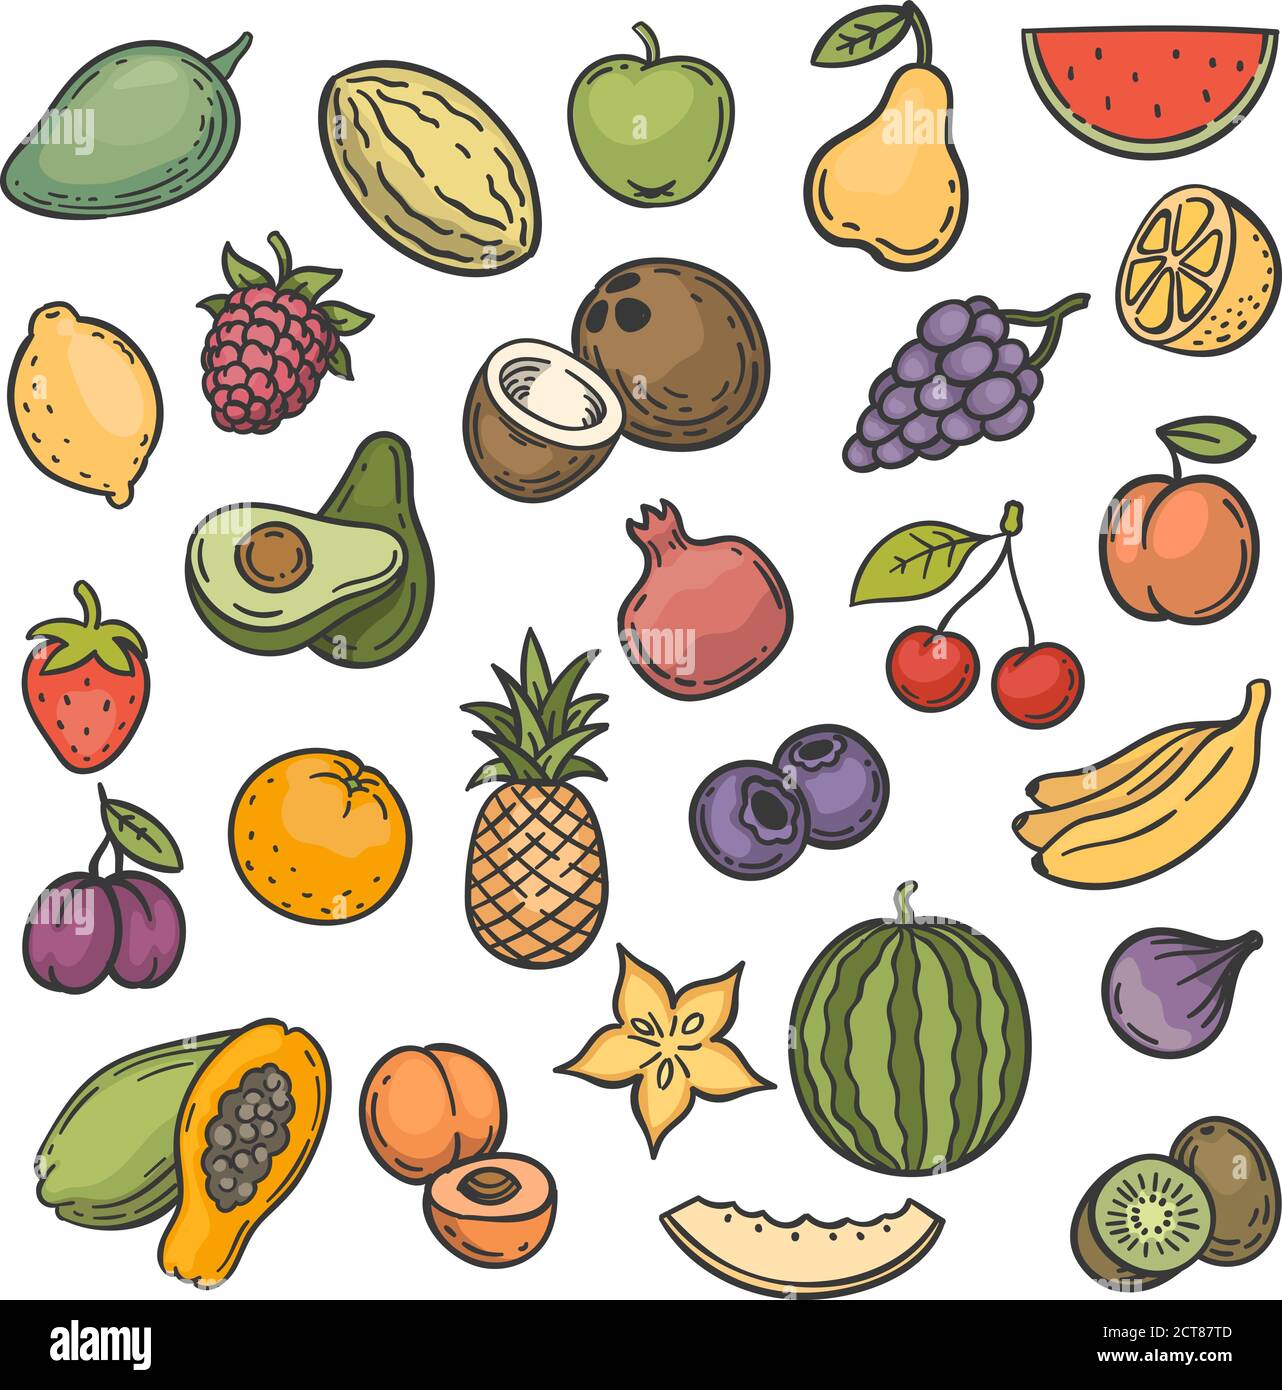 How to Draw a Basket of Fruit: 14 Steps - The Tech Edvocate